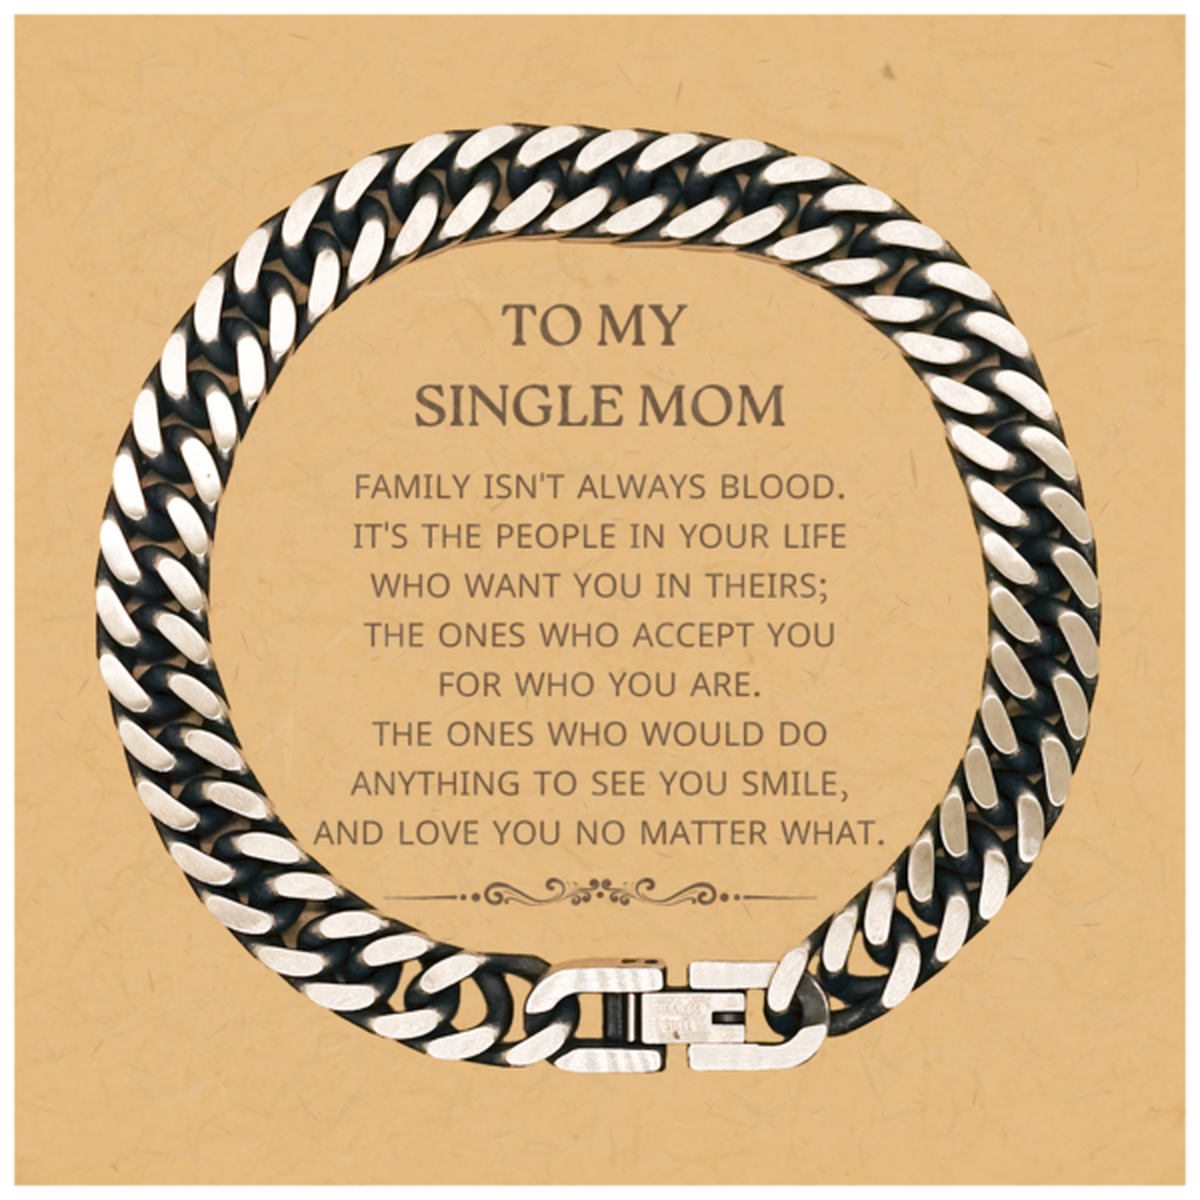 To My Single Mom Gifts, Family isn't always blood, Single Mom Cuban Link Chain Bracelet, Birthday Christmas Unique Present For Single Mom